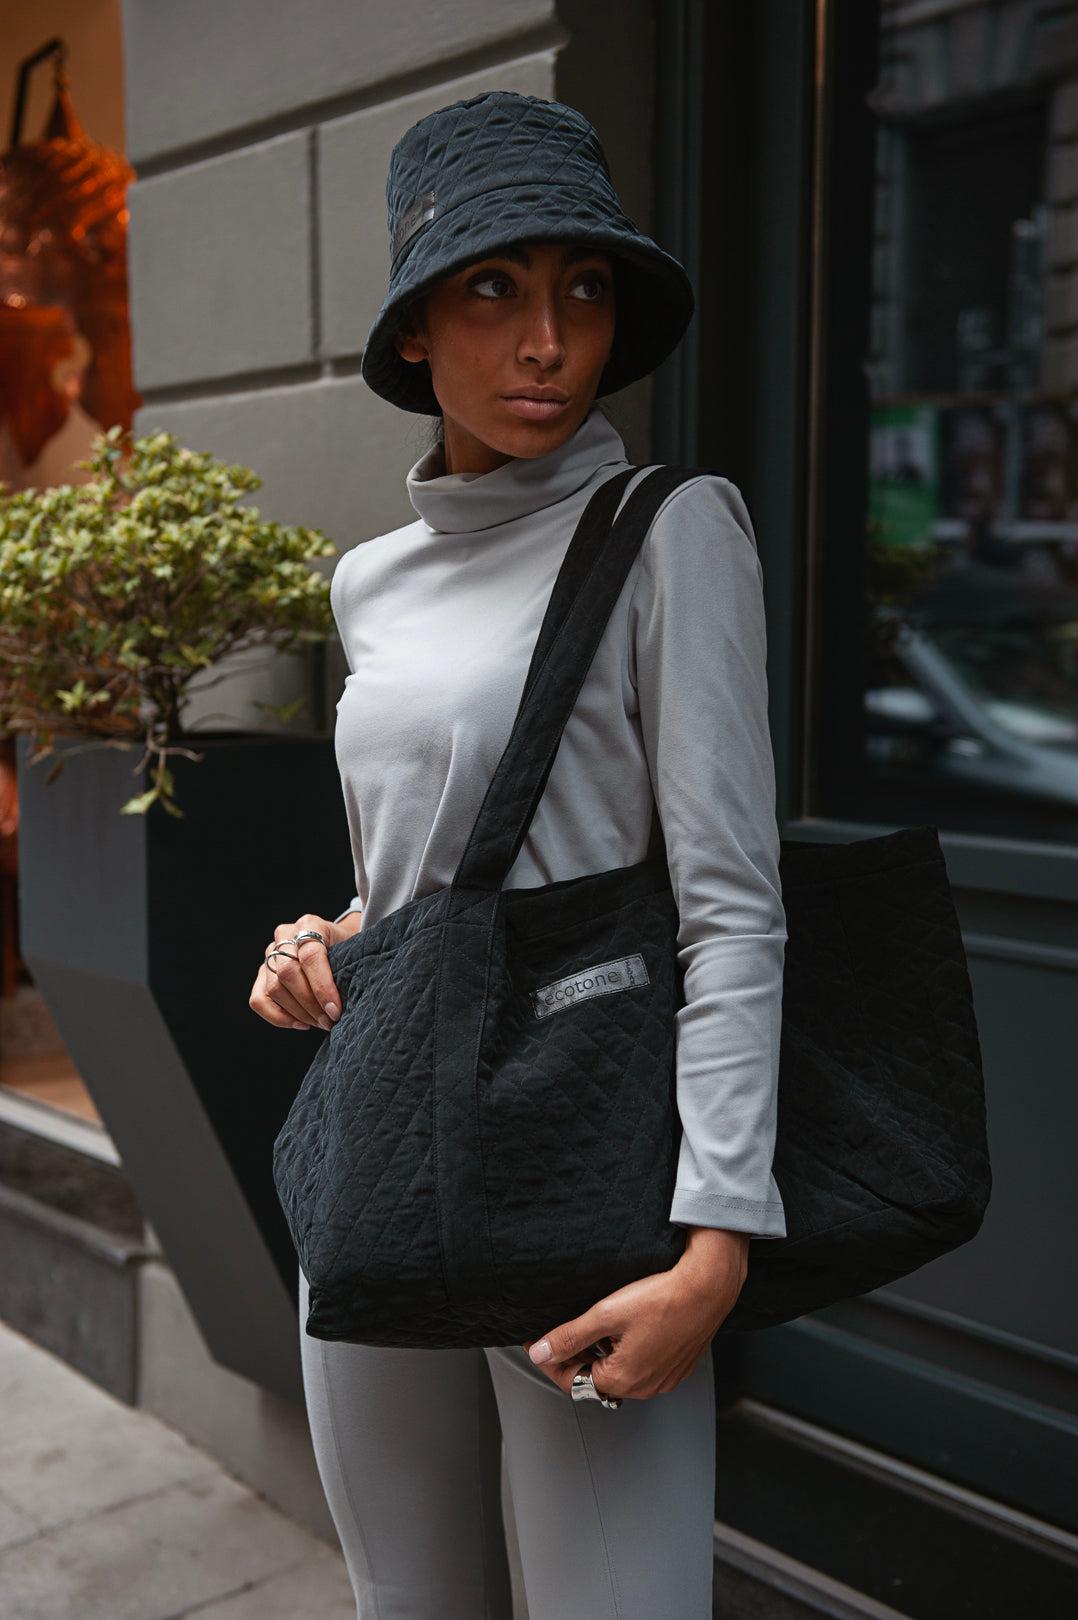 Brooklyn Quilted Bag - Black